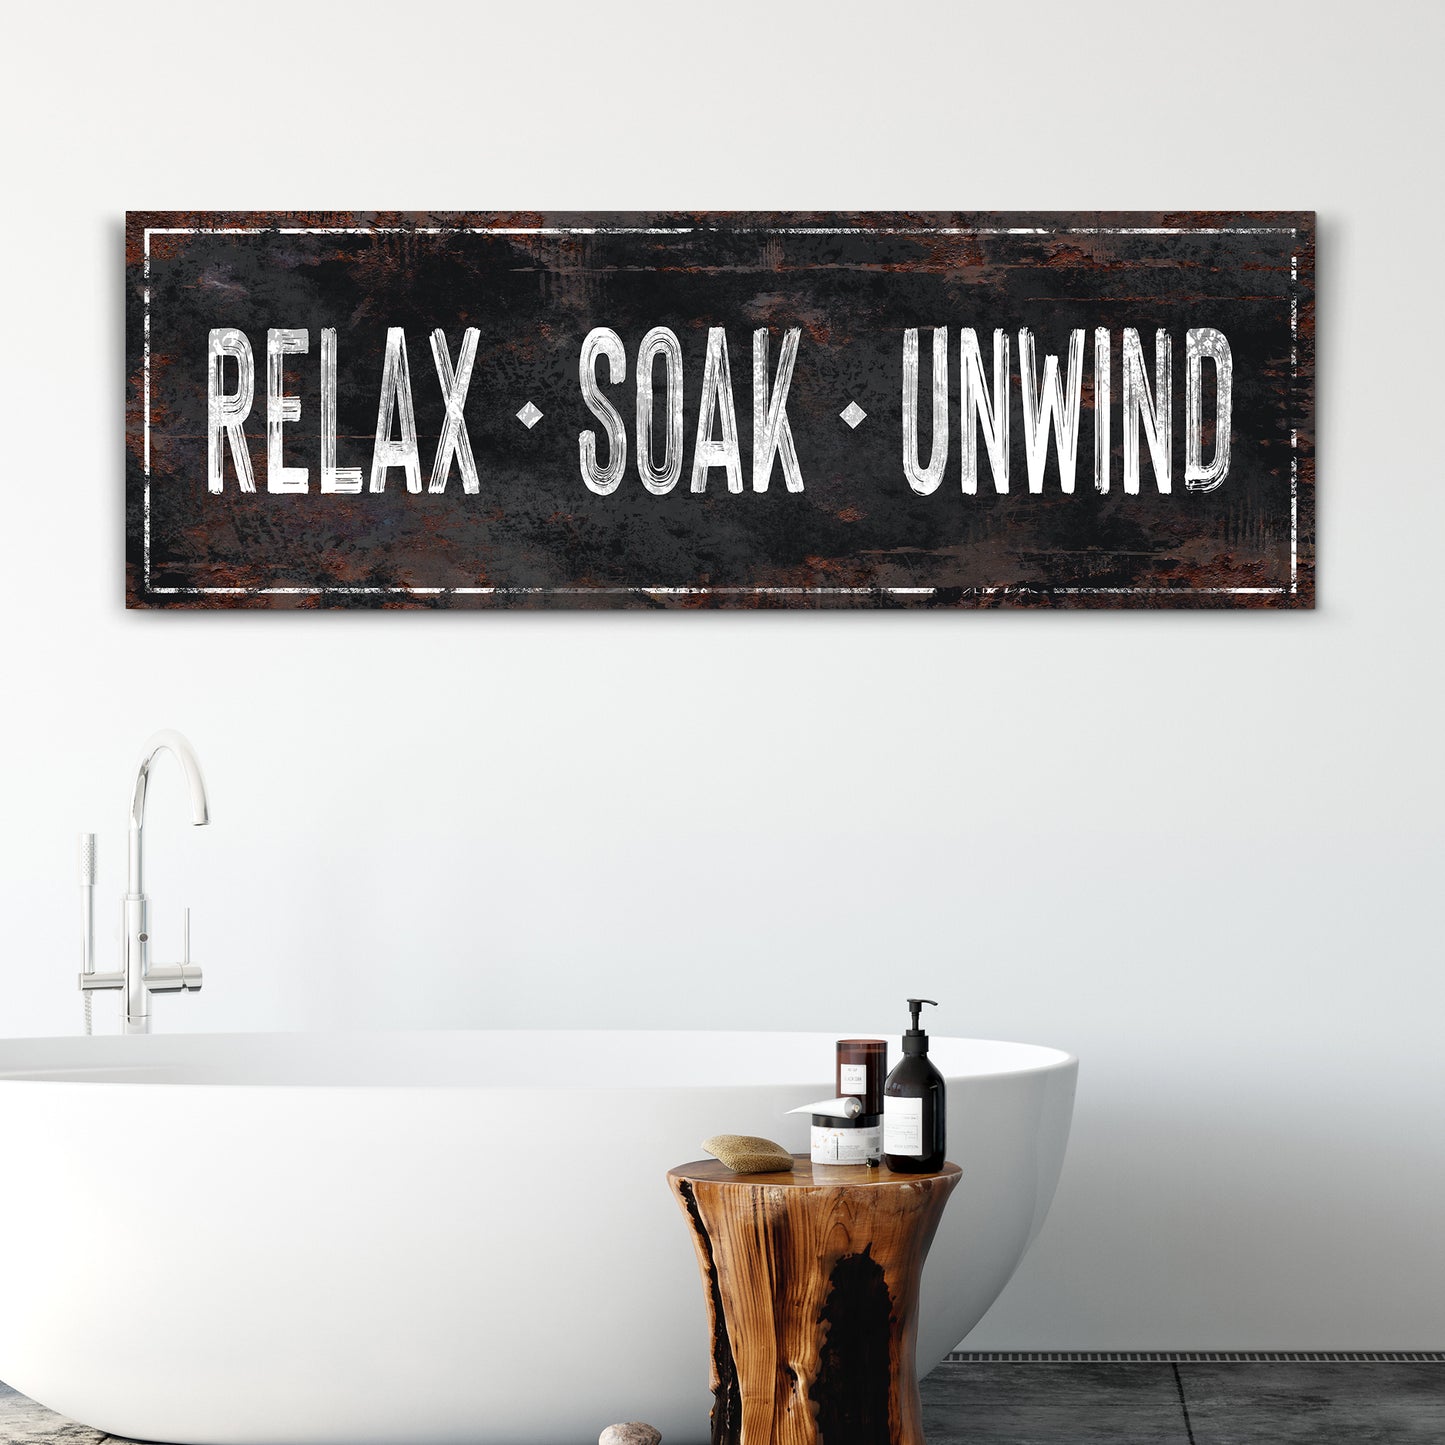 Relax Soak Unwind Sign - Image by Tailored Canvases